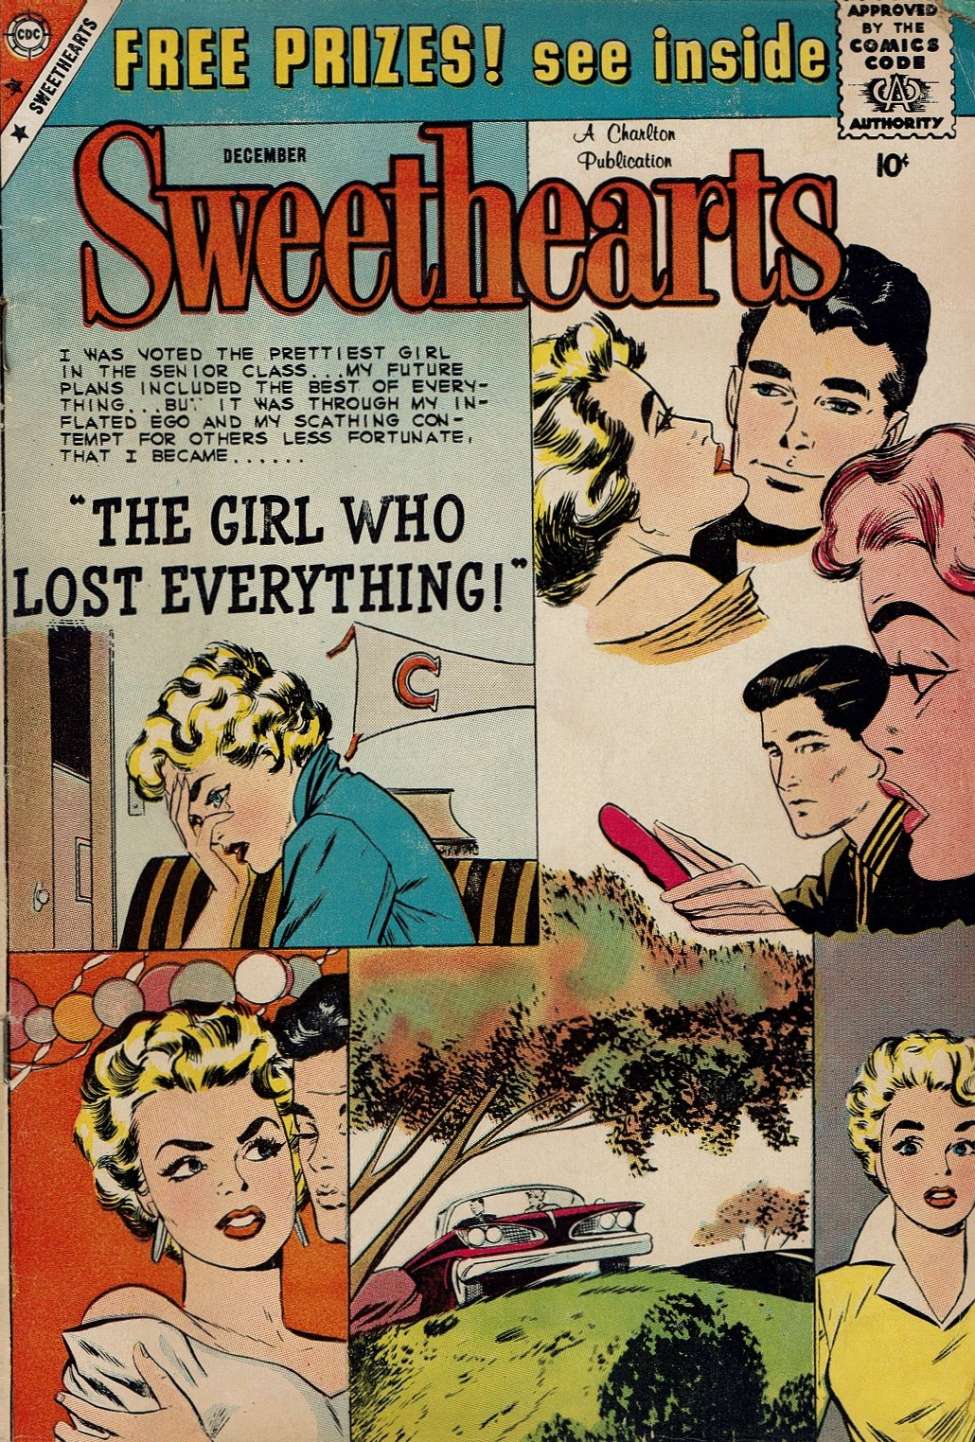 Book Cover For Sweethearts 51 - Version 2